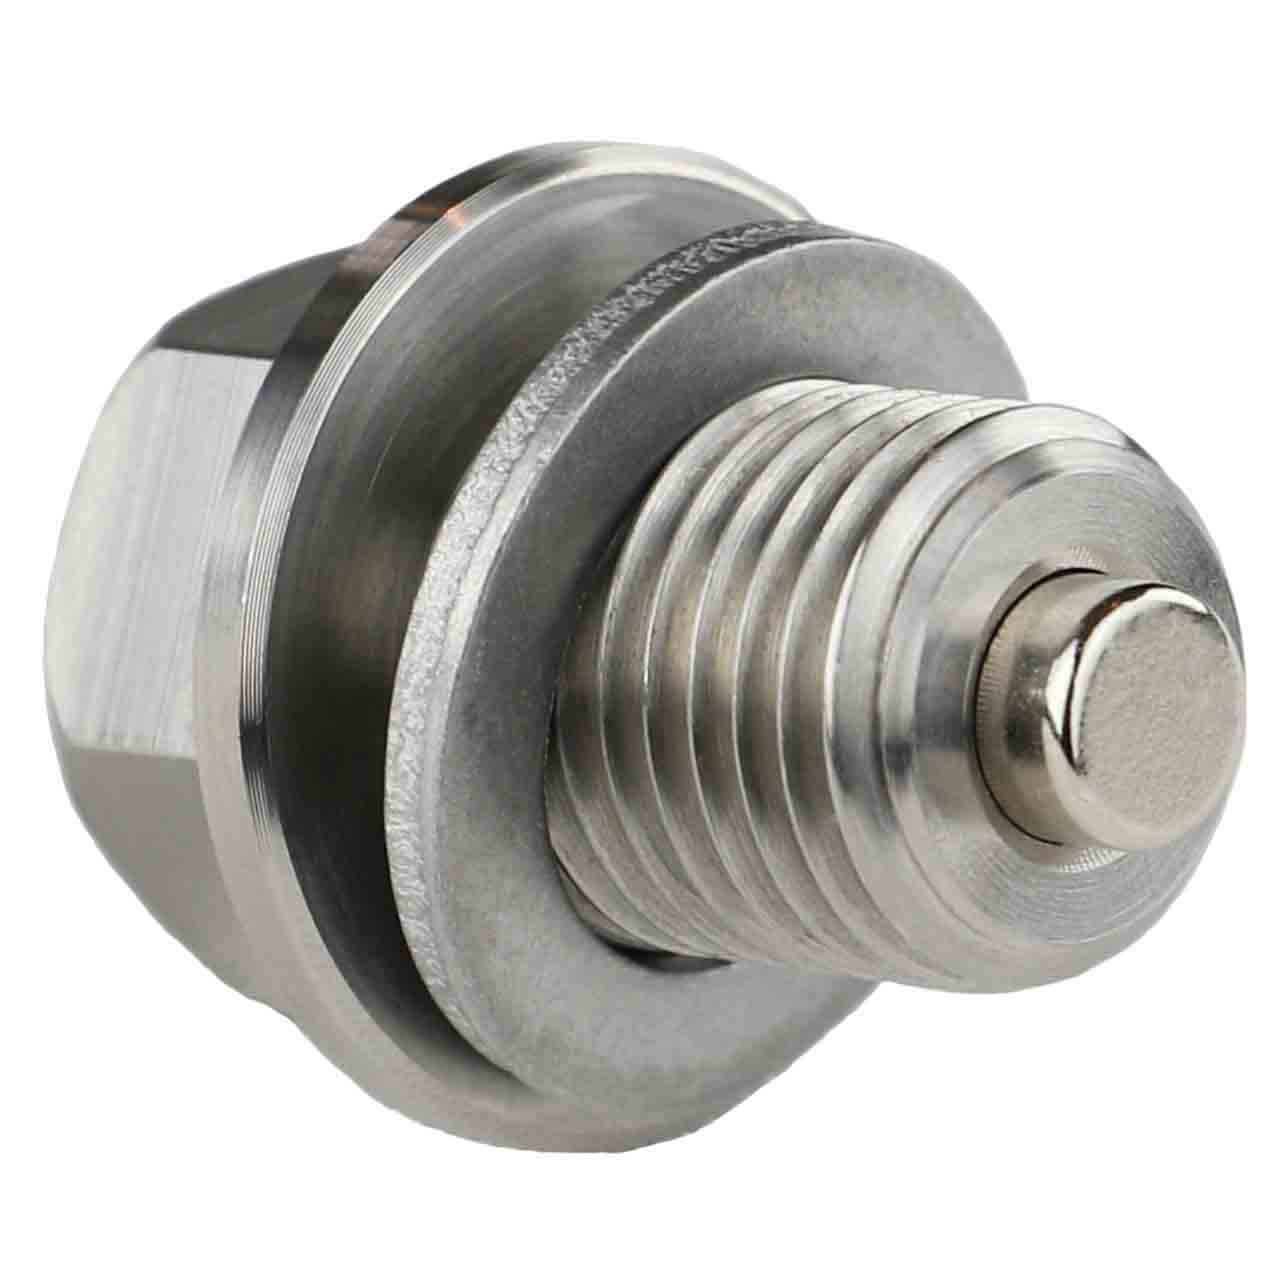 Geo Metro Magnetic Oil Drain Plug - 1989-1997 - 1.0  Liter - 3 Cylinder - Made In USA - Stainless Steel - Part Number 91177579